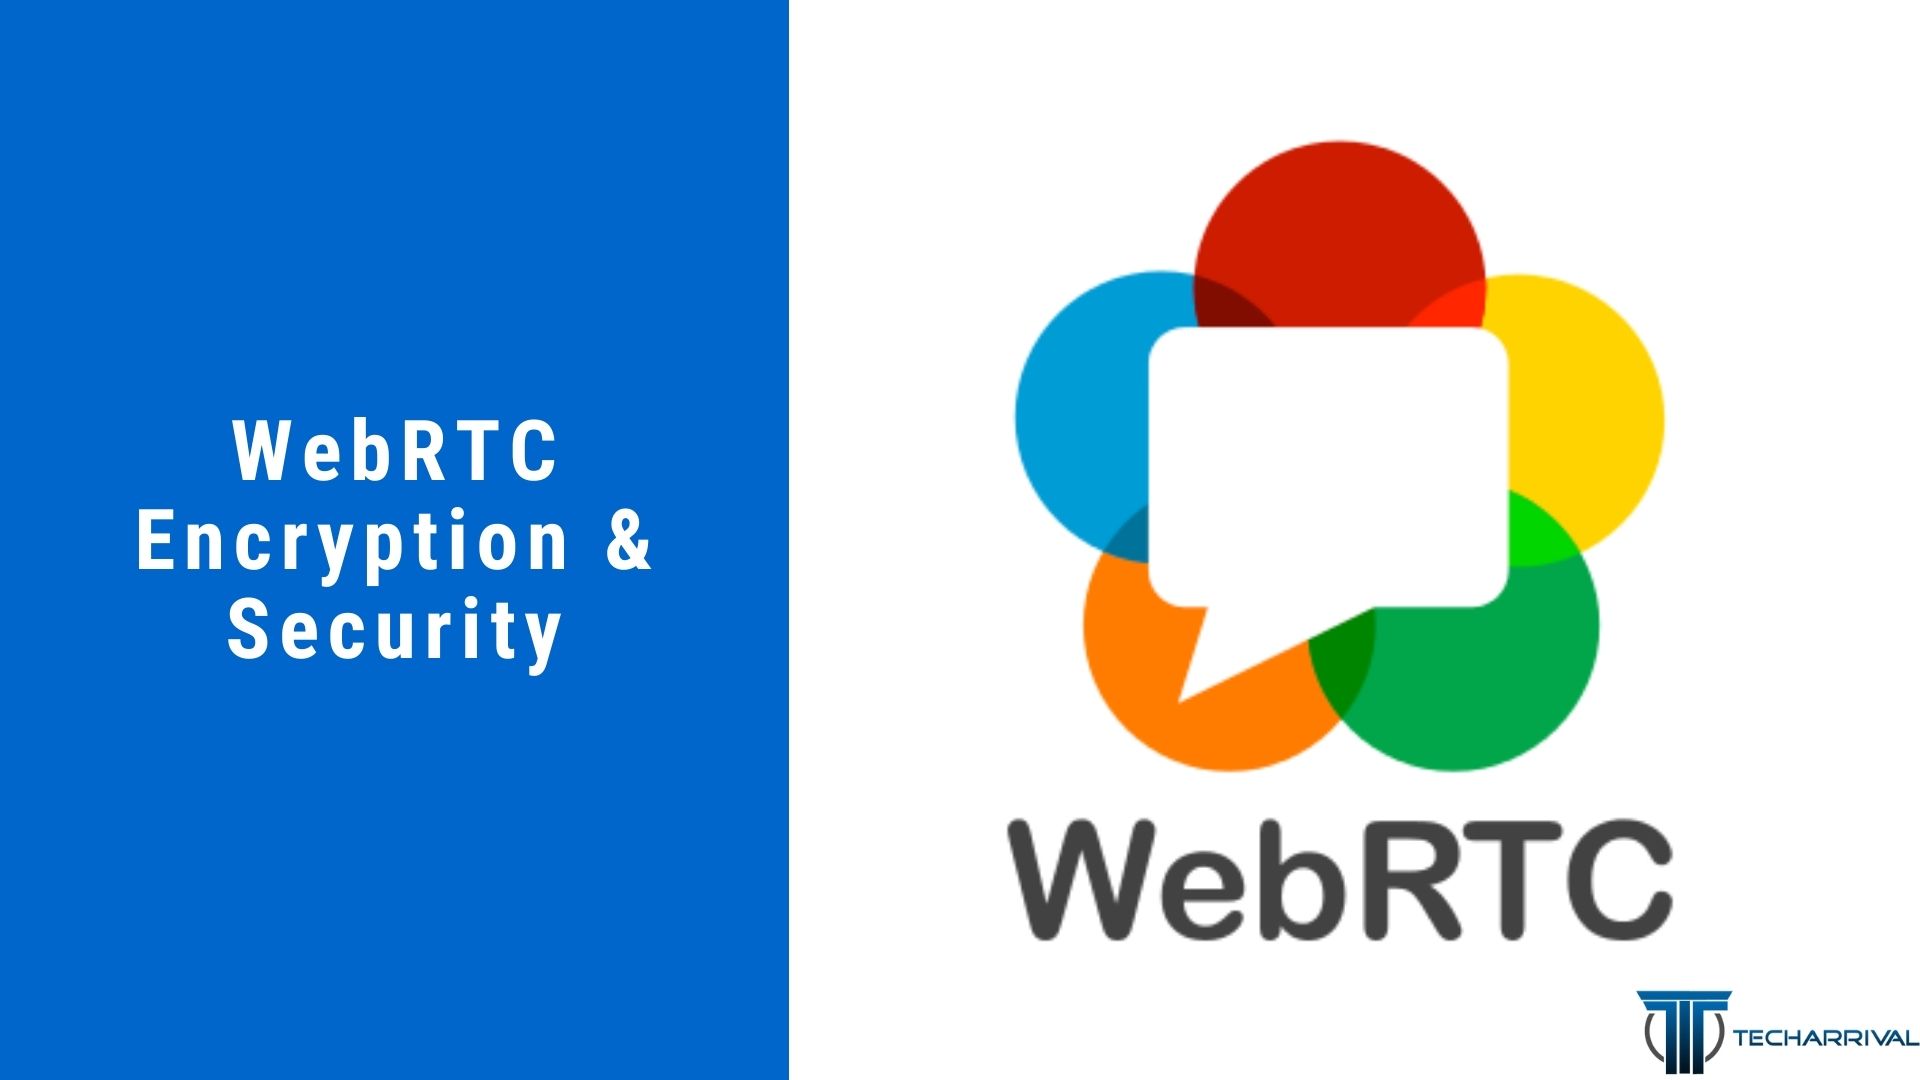 WebRTC Encryption & Security: Everything You Need to Know